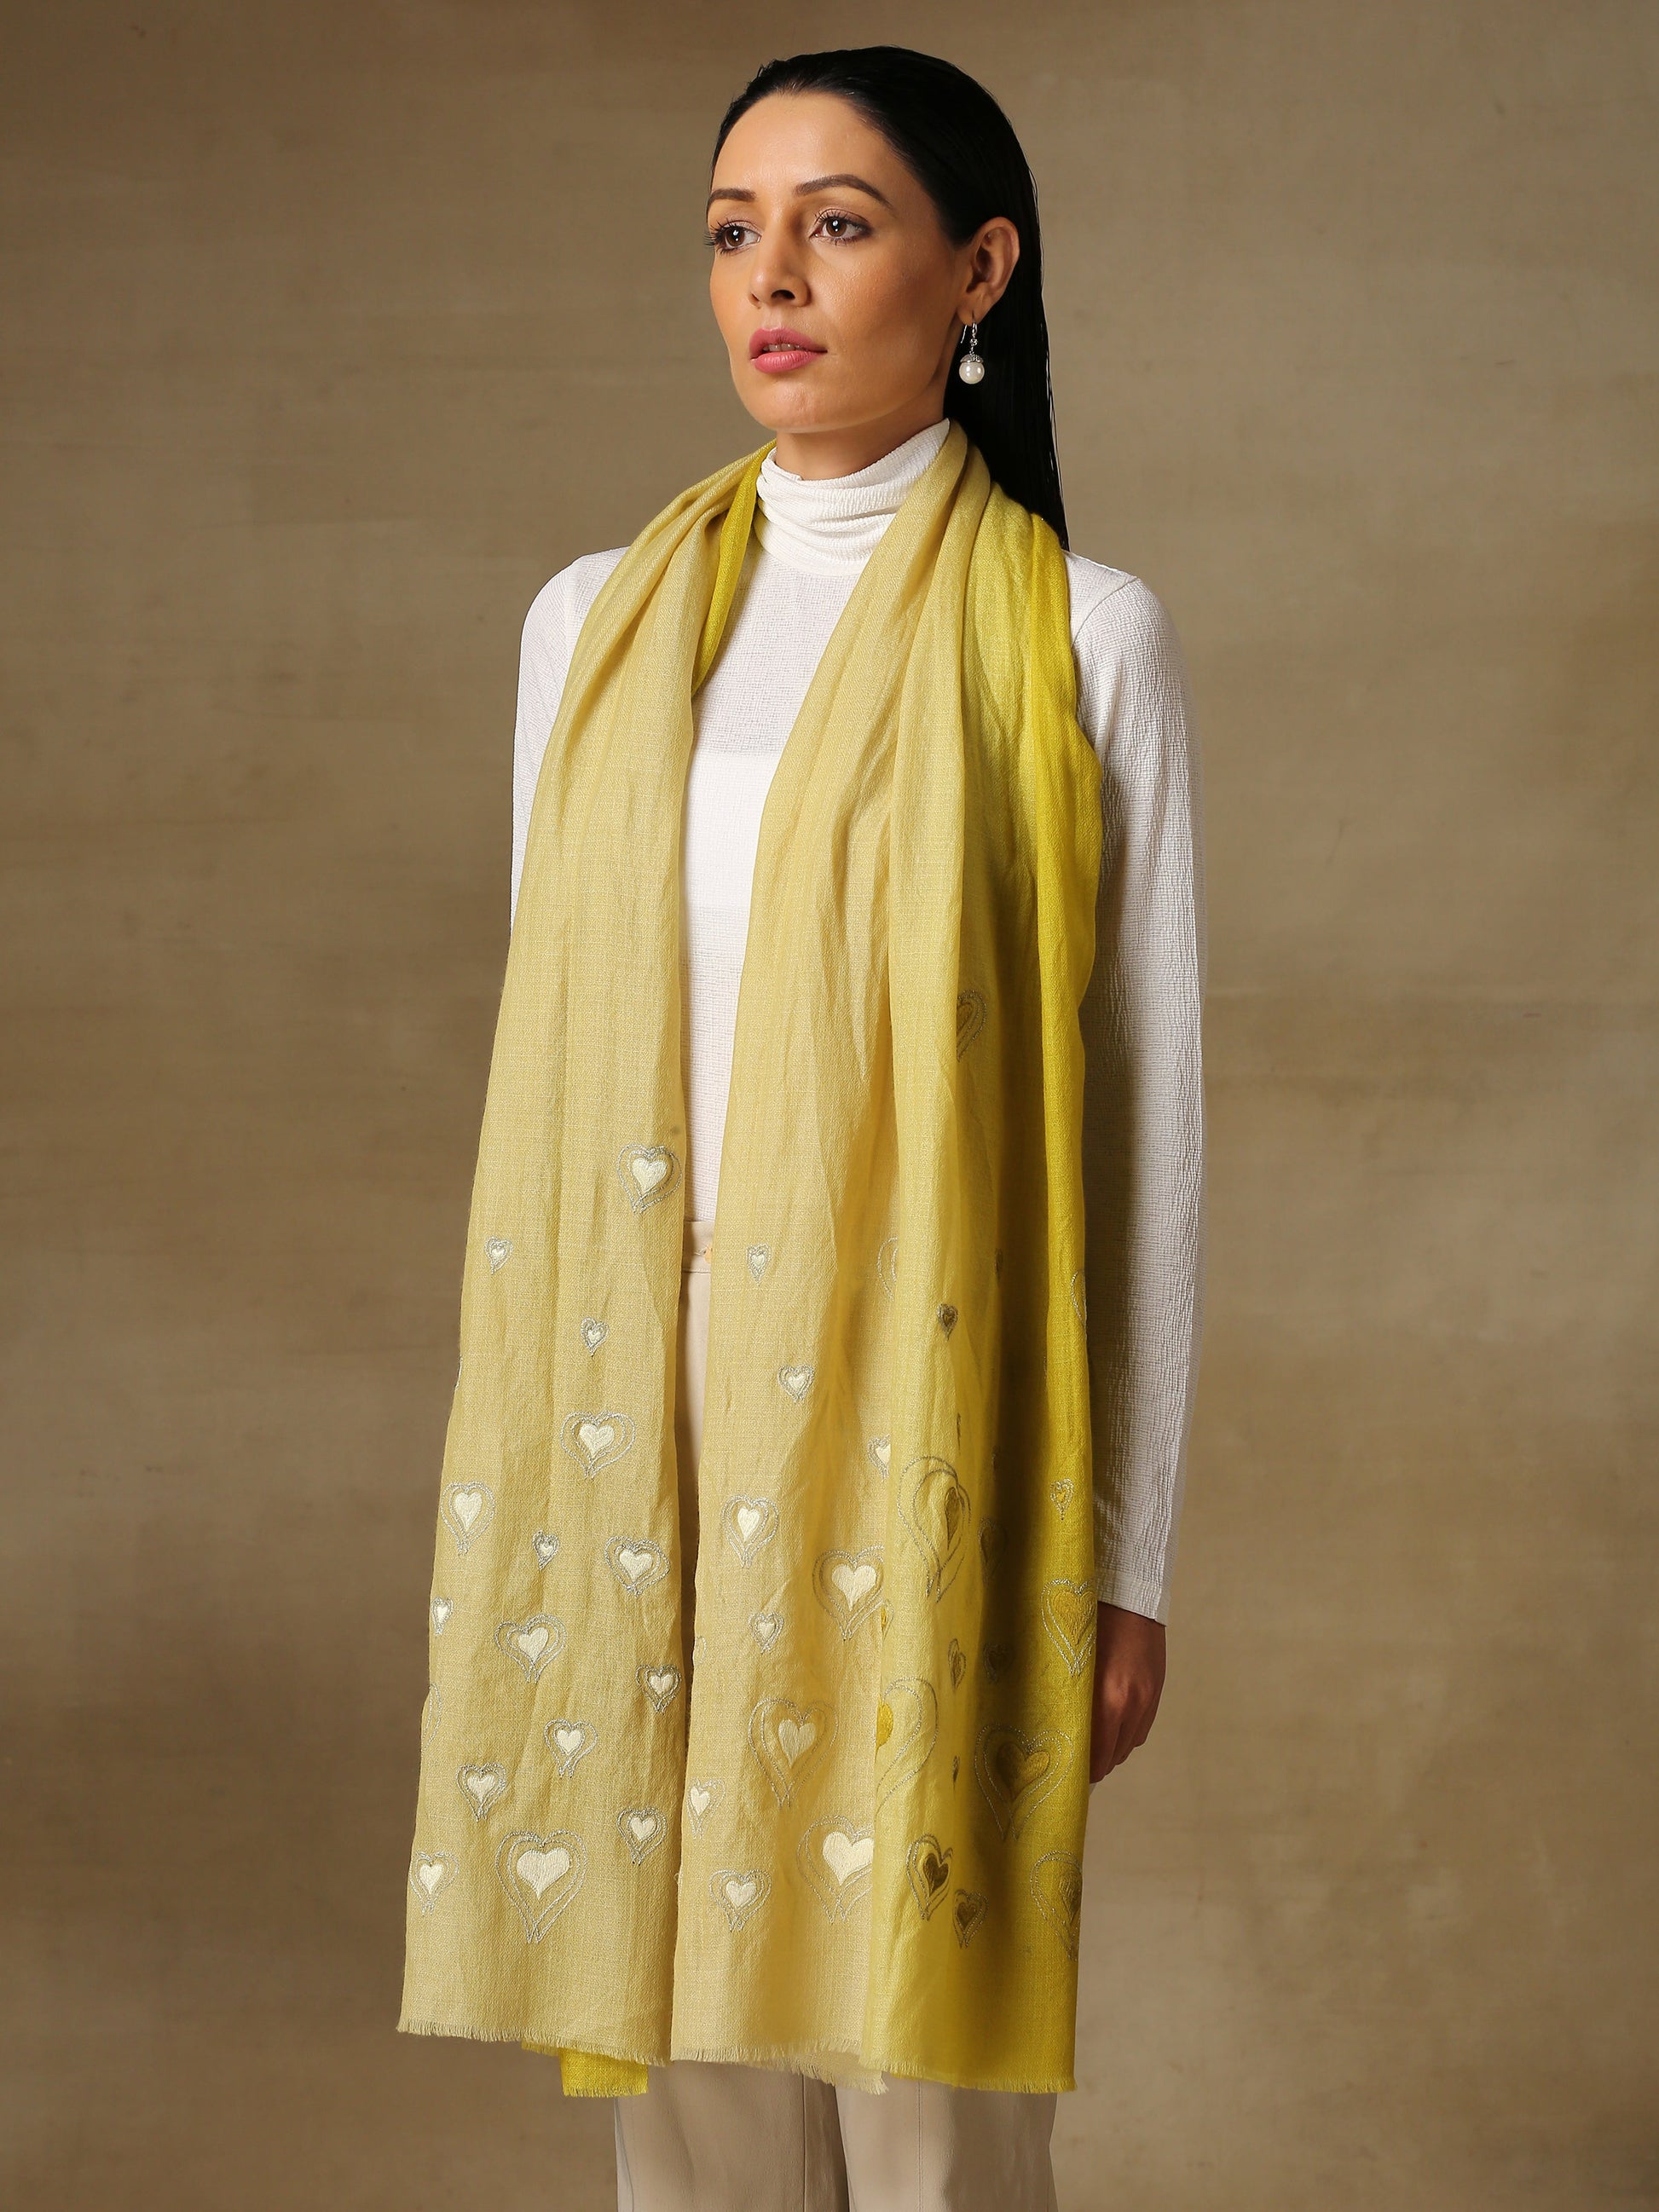 Model is wearing the Love tales pashmina stole in pista green from shaza, hand embroidered with heart shaped threadwork. 